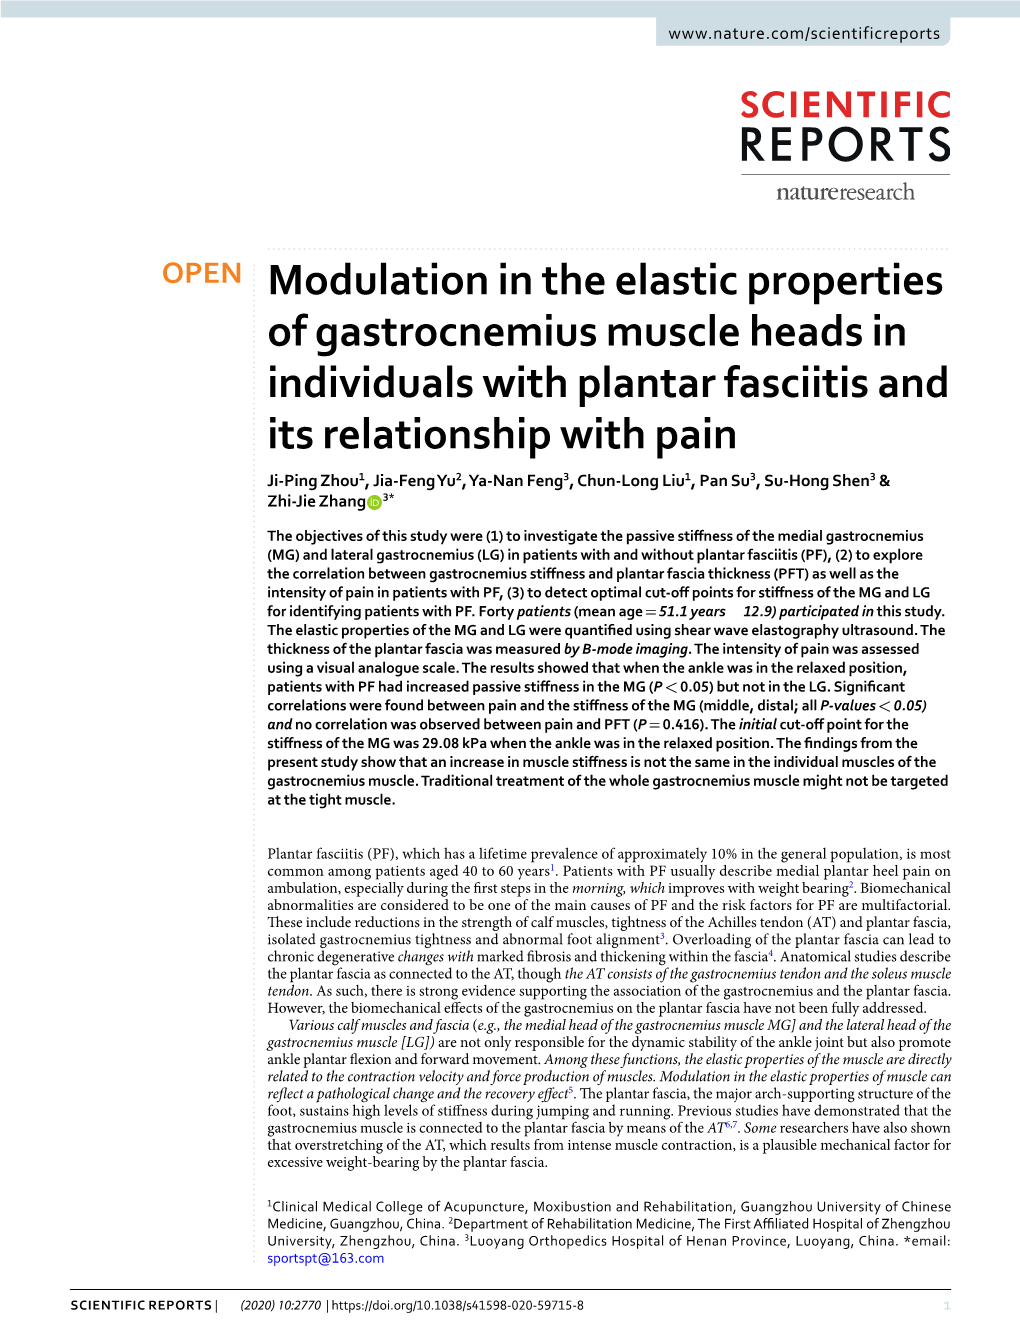 Modulation in the Elastic Properties of Gastrocnemius Muscle Heads In